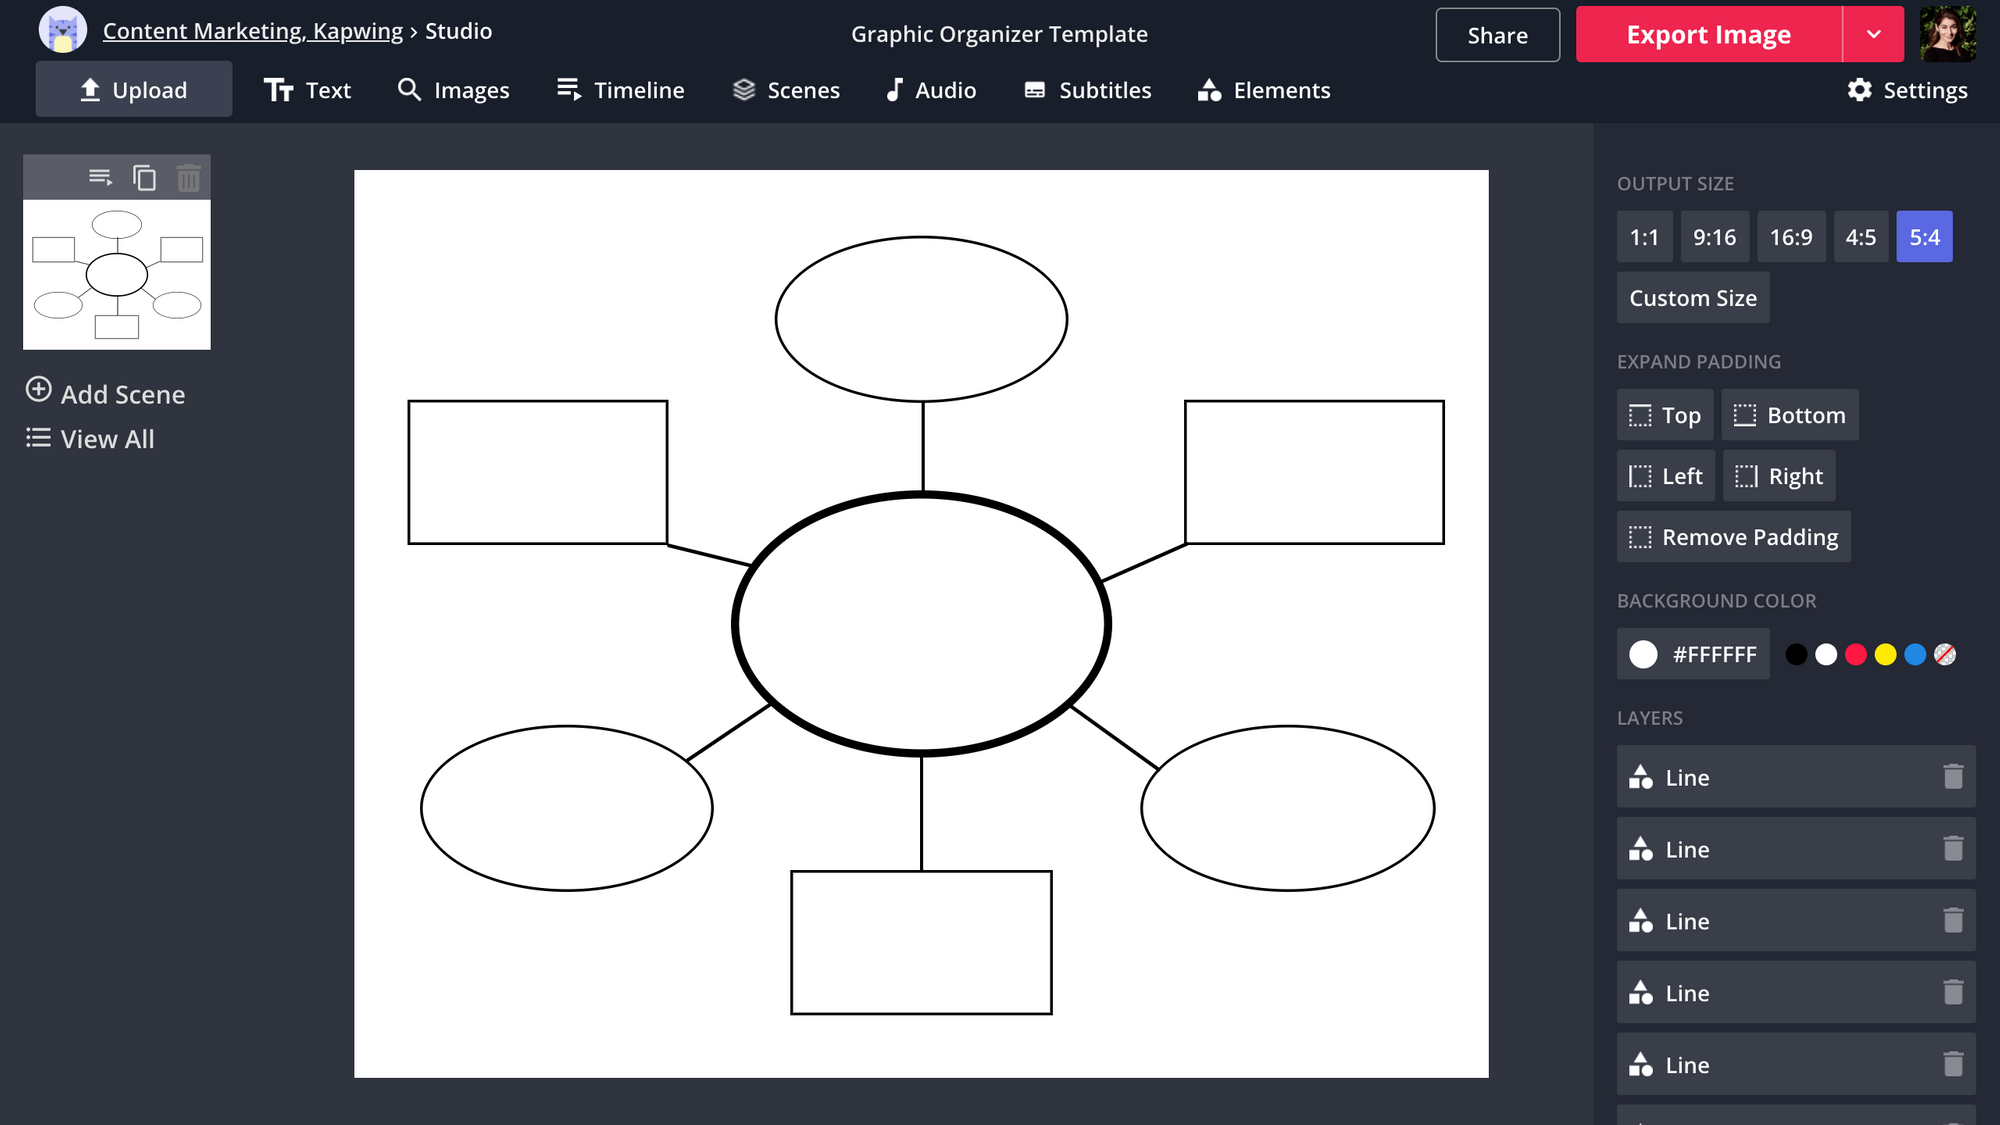 How to Make a Graphic Organizer for Free Online